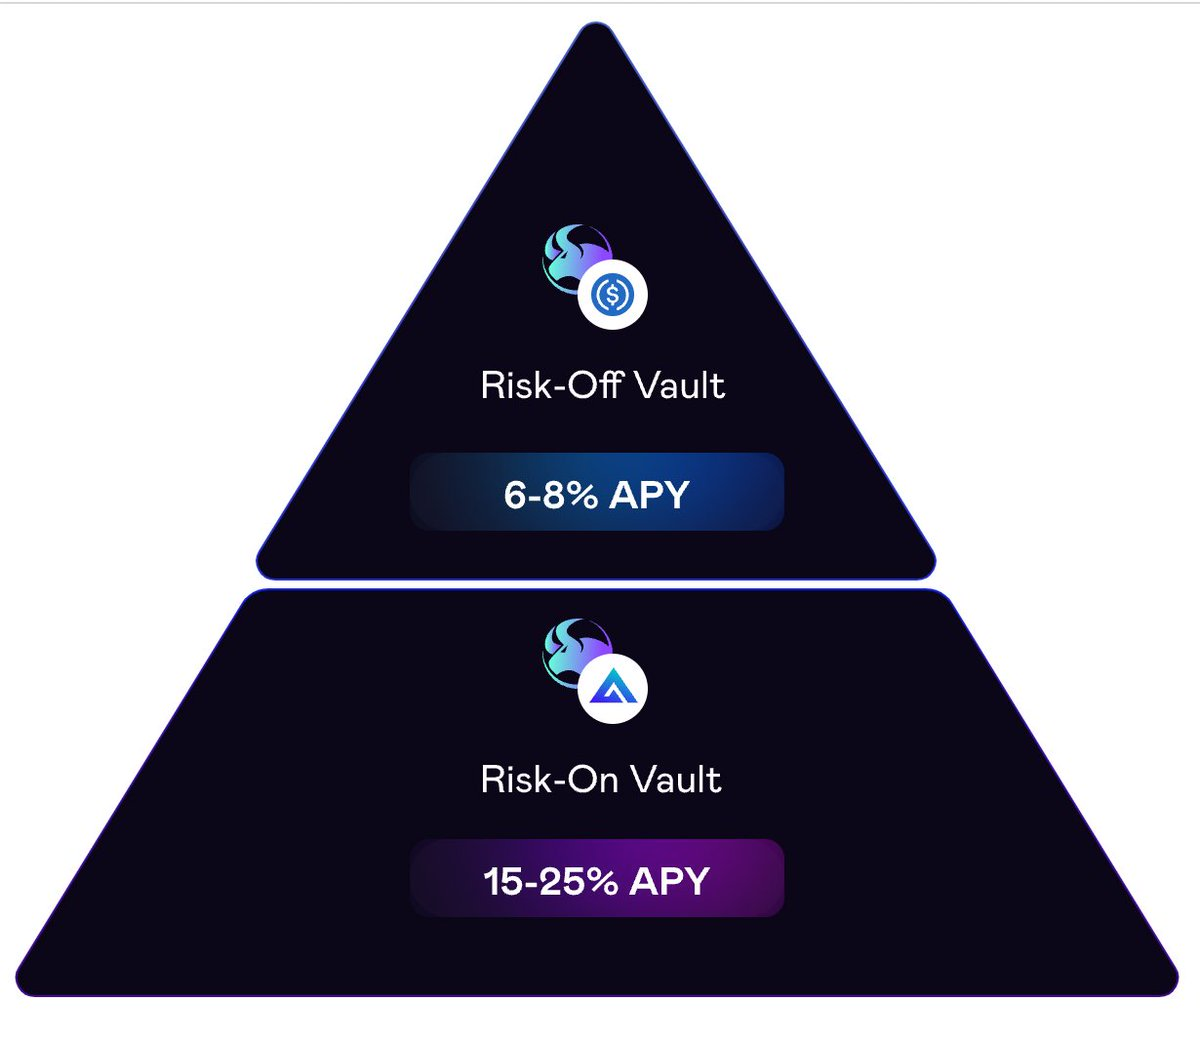 Different yield ranges for GLP risk-on and risk-off vaults, from @crypto_noodles on Twitter